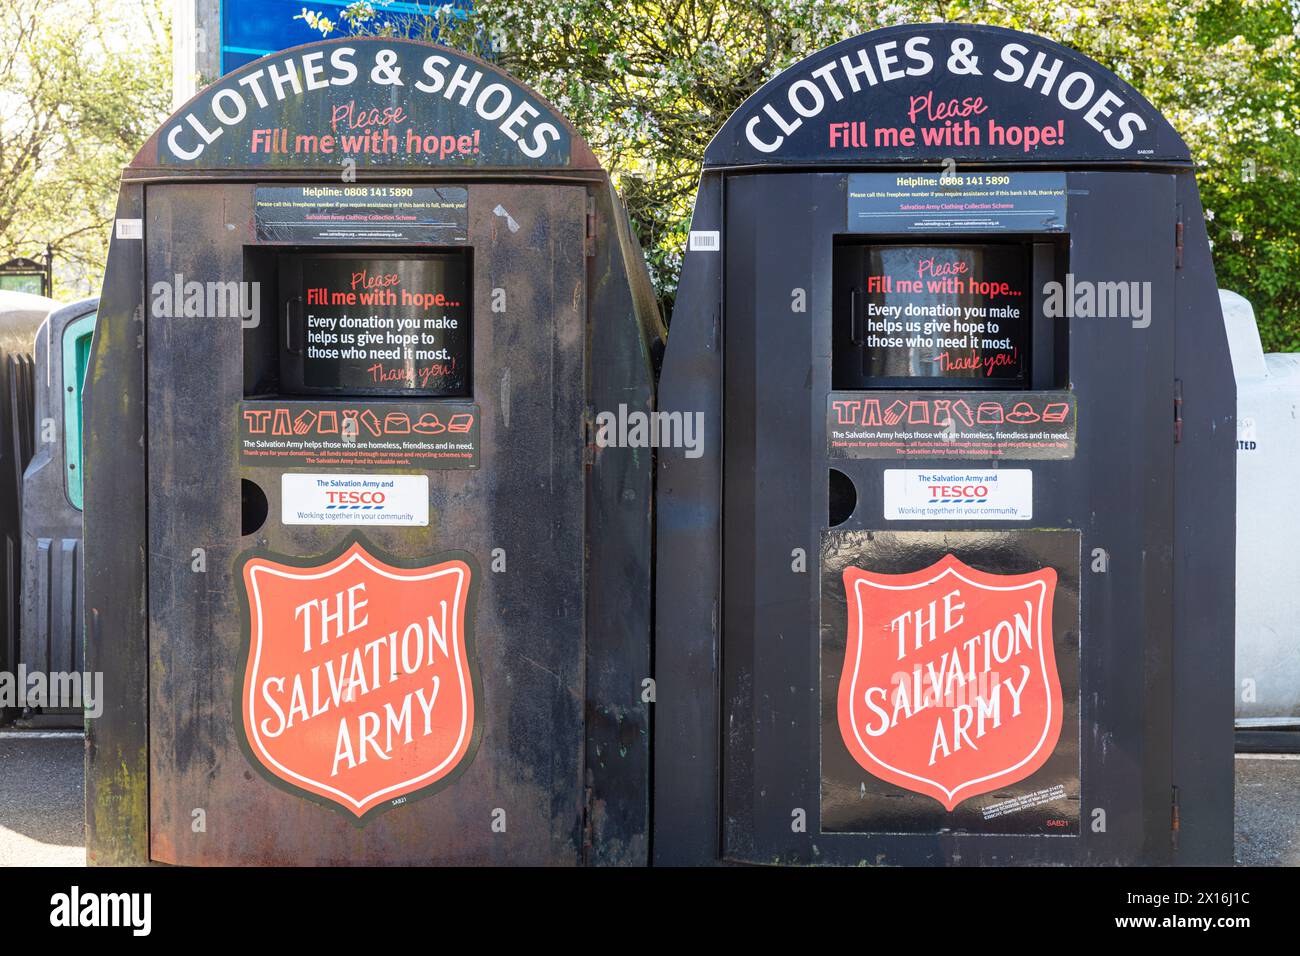 Salvation Army Charity bins, Salvation army, donation bins, collection bins, charity bins, collection, donation, Horncastle, Lincolnshire, UK, England Stock Photo